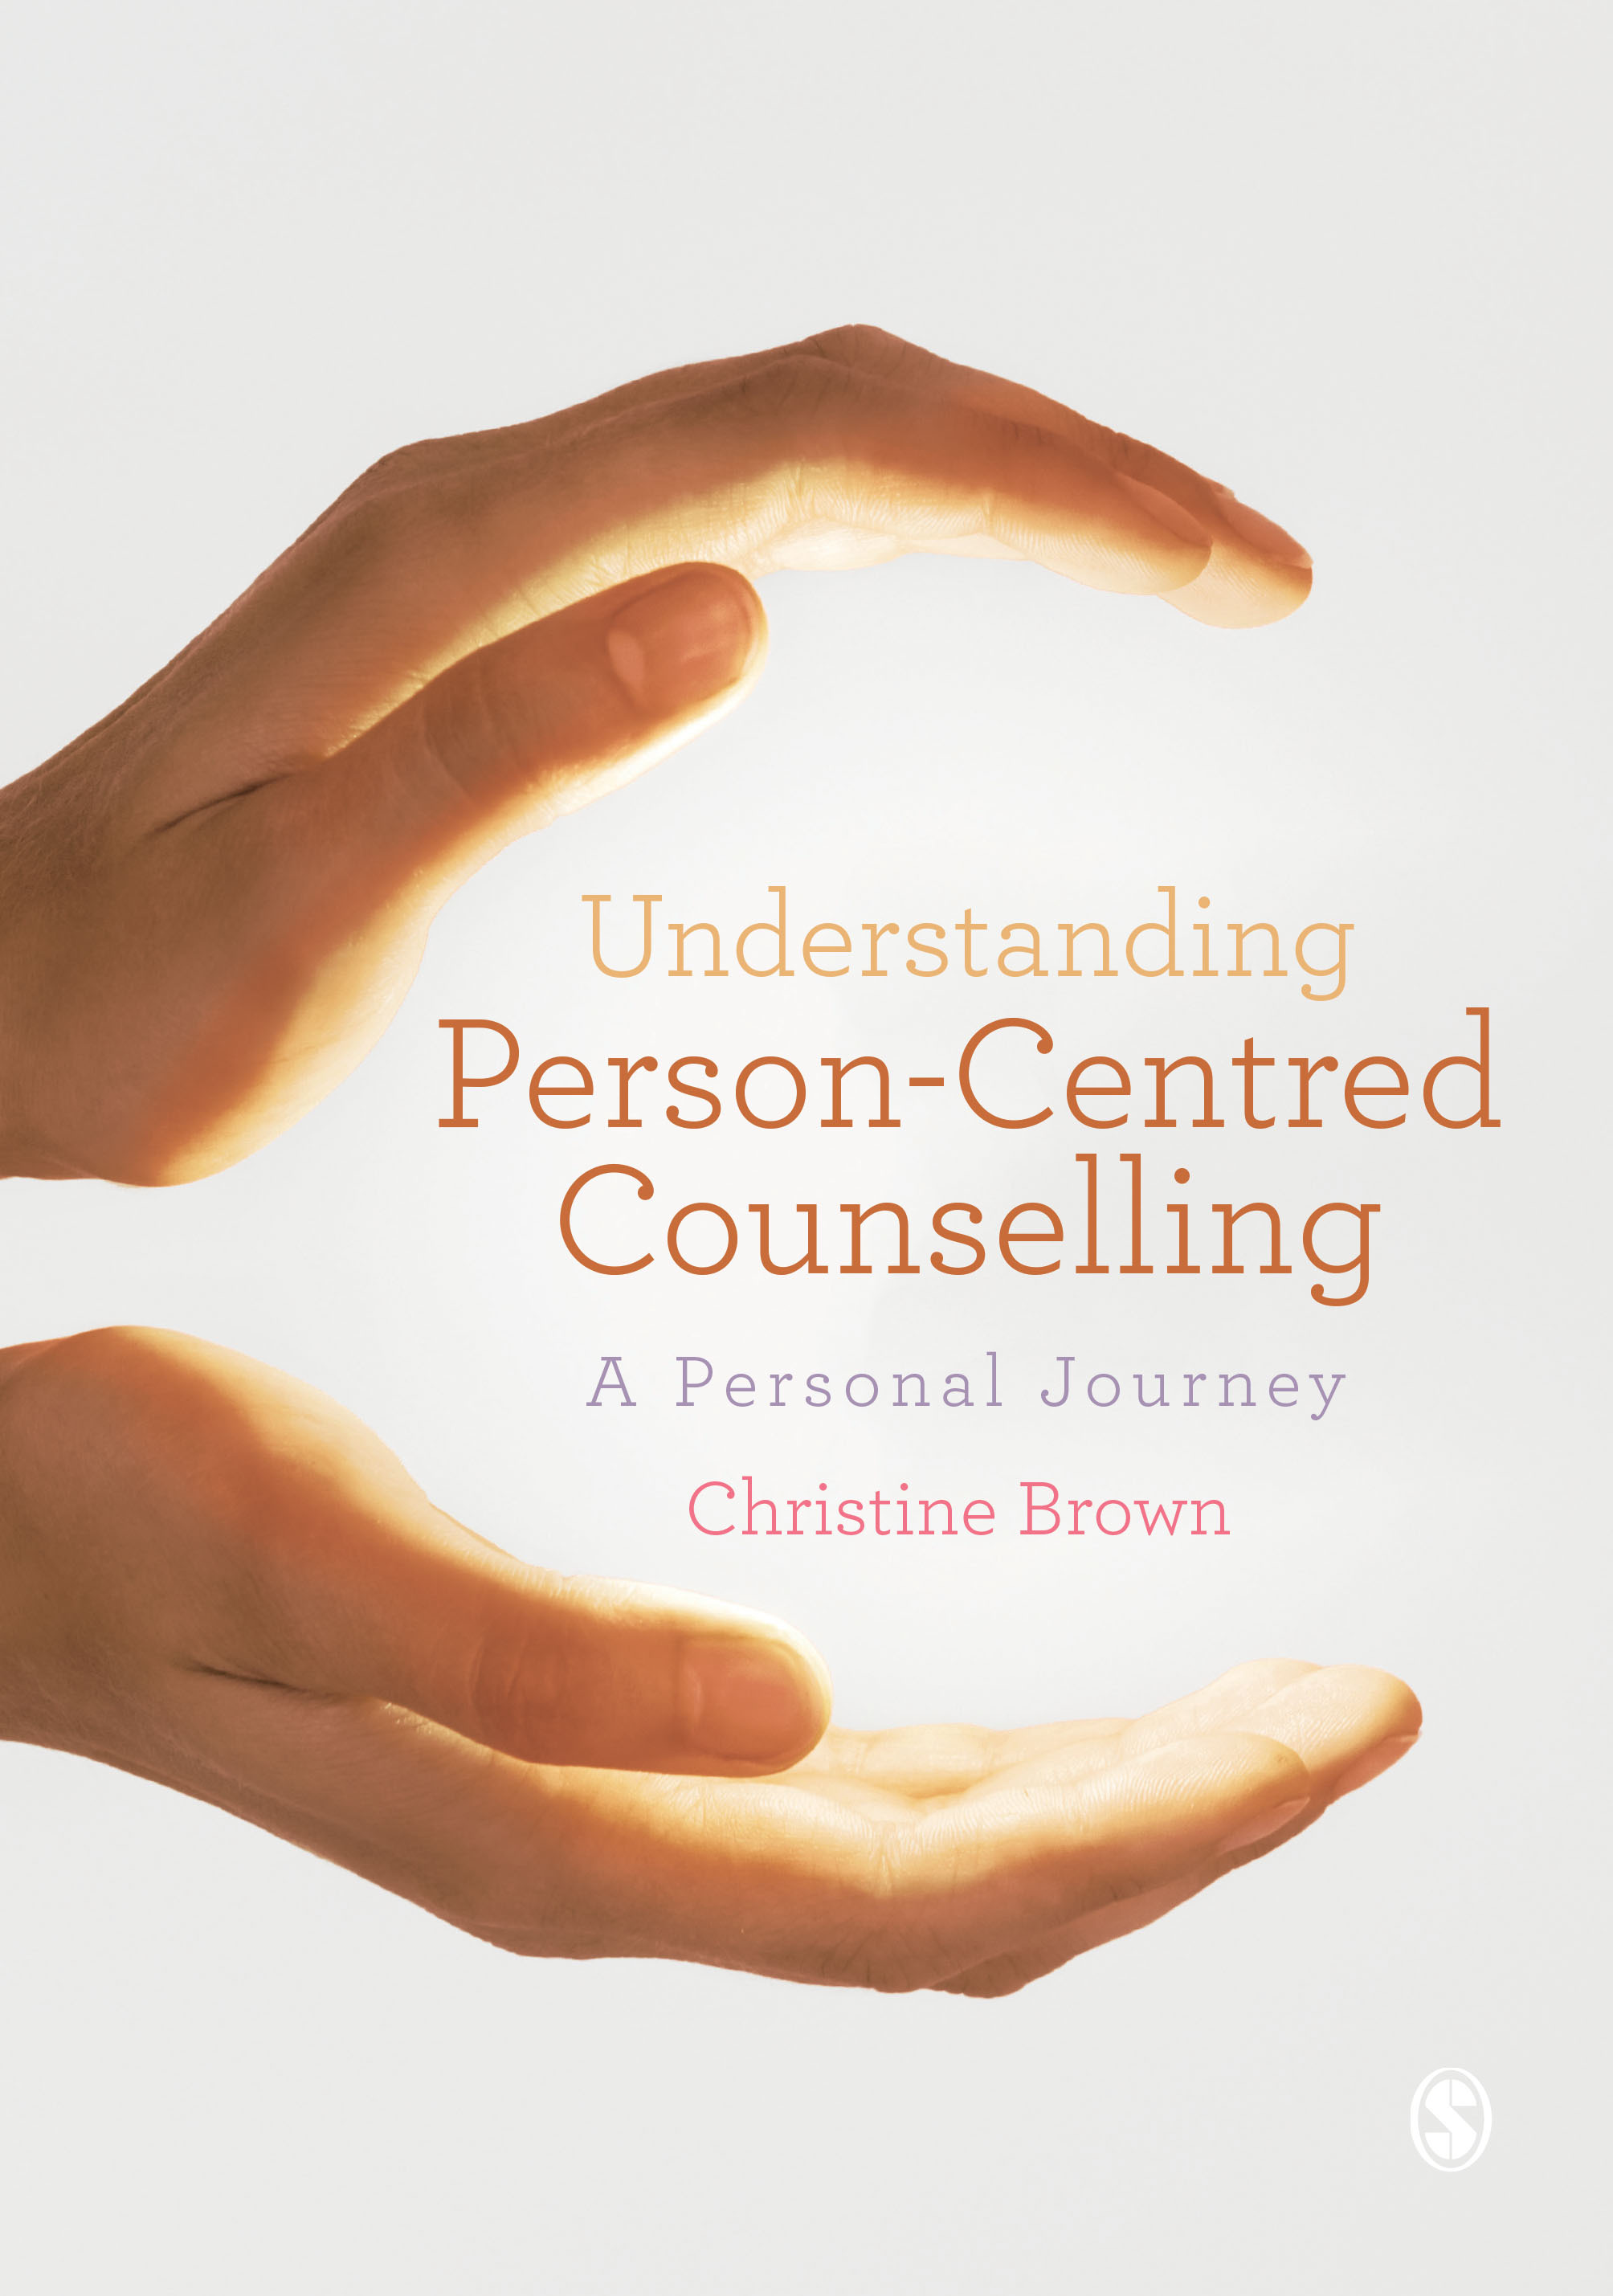 Understanding Person-Centred Counselling book cover image